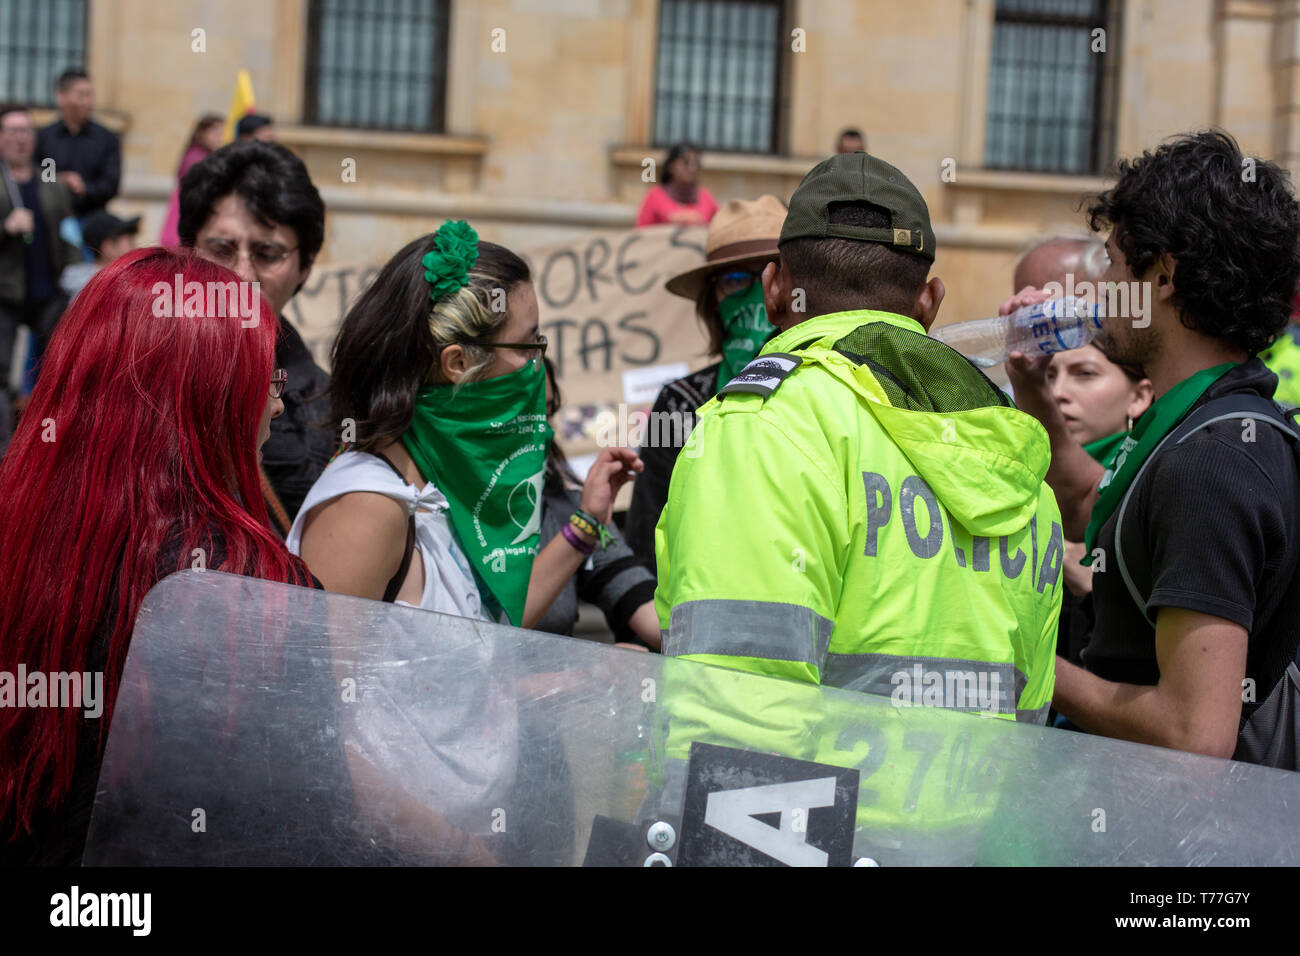 Bogota, Colombia. 04th May, 2019. The police talks to a feminist and pro choice group to keep order during the 'Unidos por la vida' (United for Life) Pro life rally in Bogota.  Under the slogan 'I choose the two lives' around 500 people demonstrated for the maintenance of traditional family values, against abortion and the killing of social leaders in the country. Catholic and right wing political groups joined the call of the 'United for Life' Platform (Unidos por la Vida) a widely spread organization in Colombia. Credit: SOPA Images Limited/Alamy Live News Stock Photo